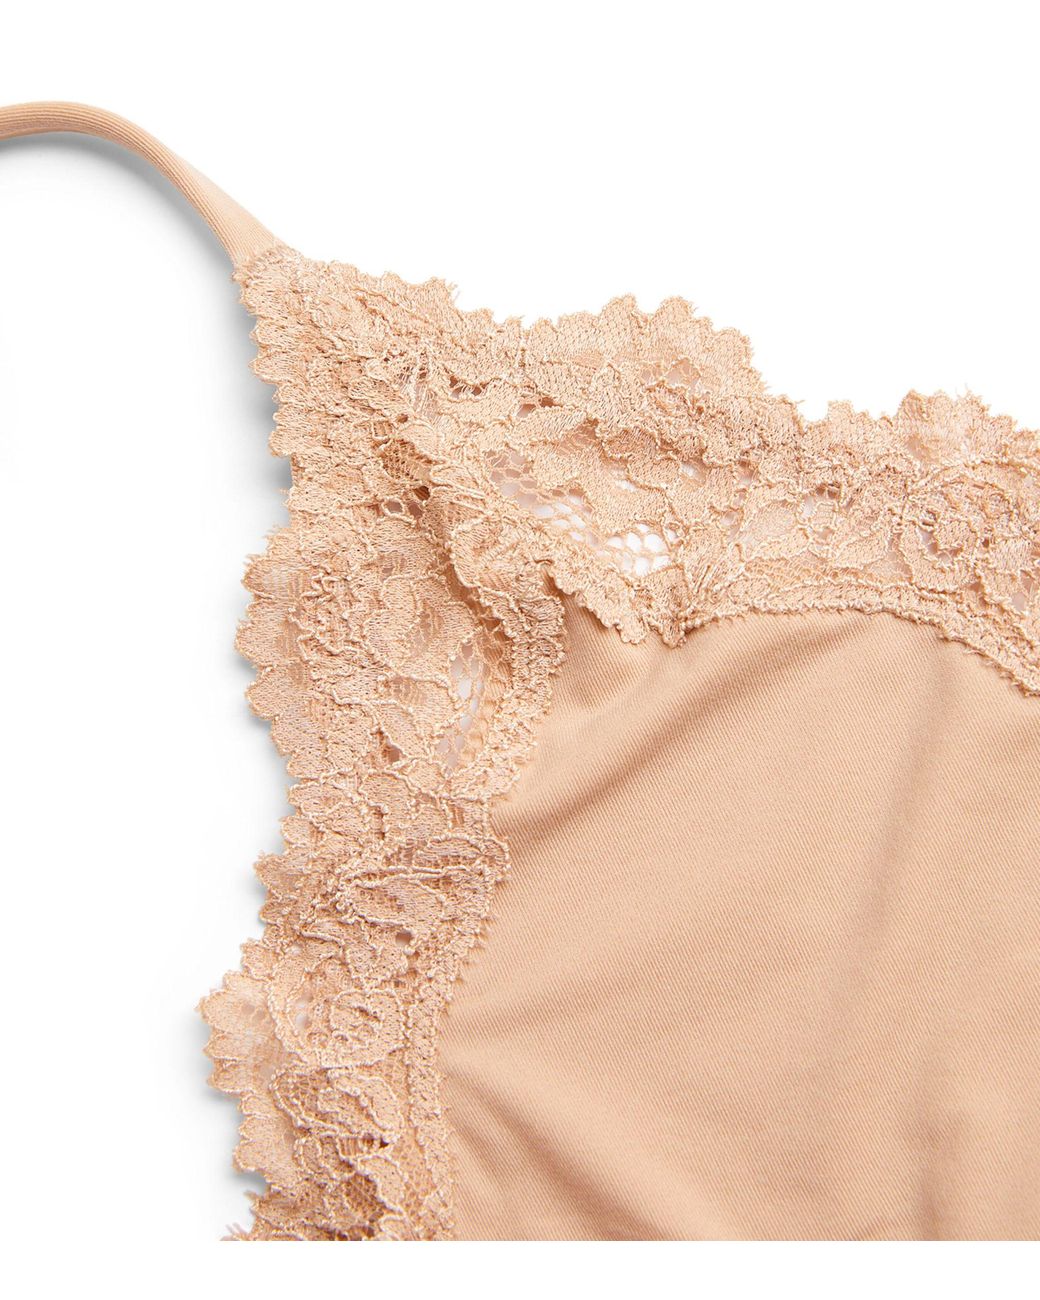 Skims Fits Everybody Lace Scoop Bralette in Natural